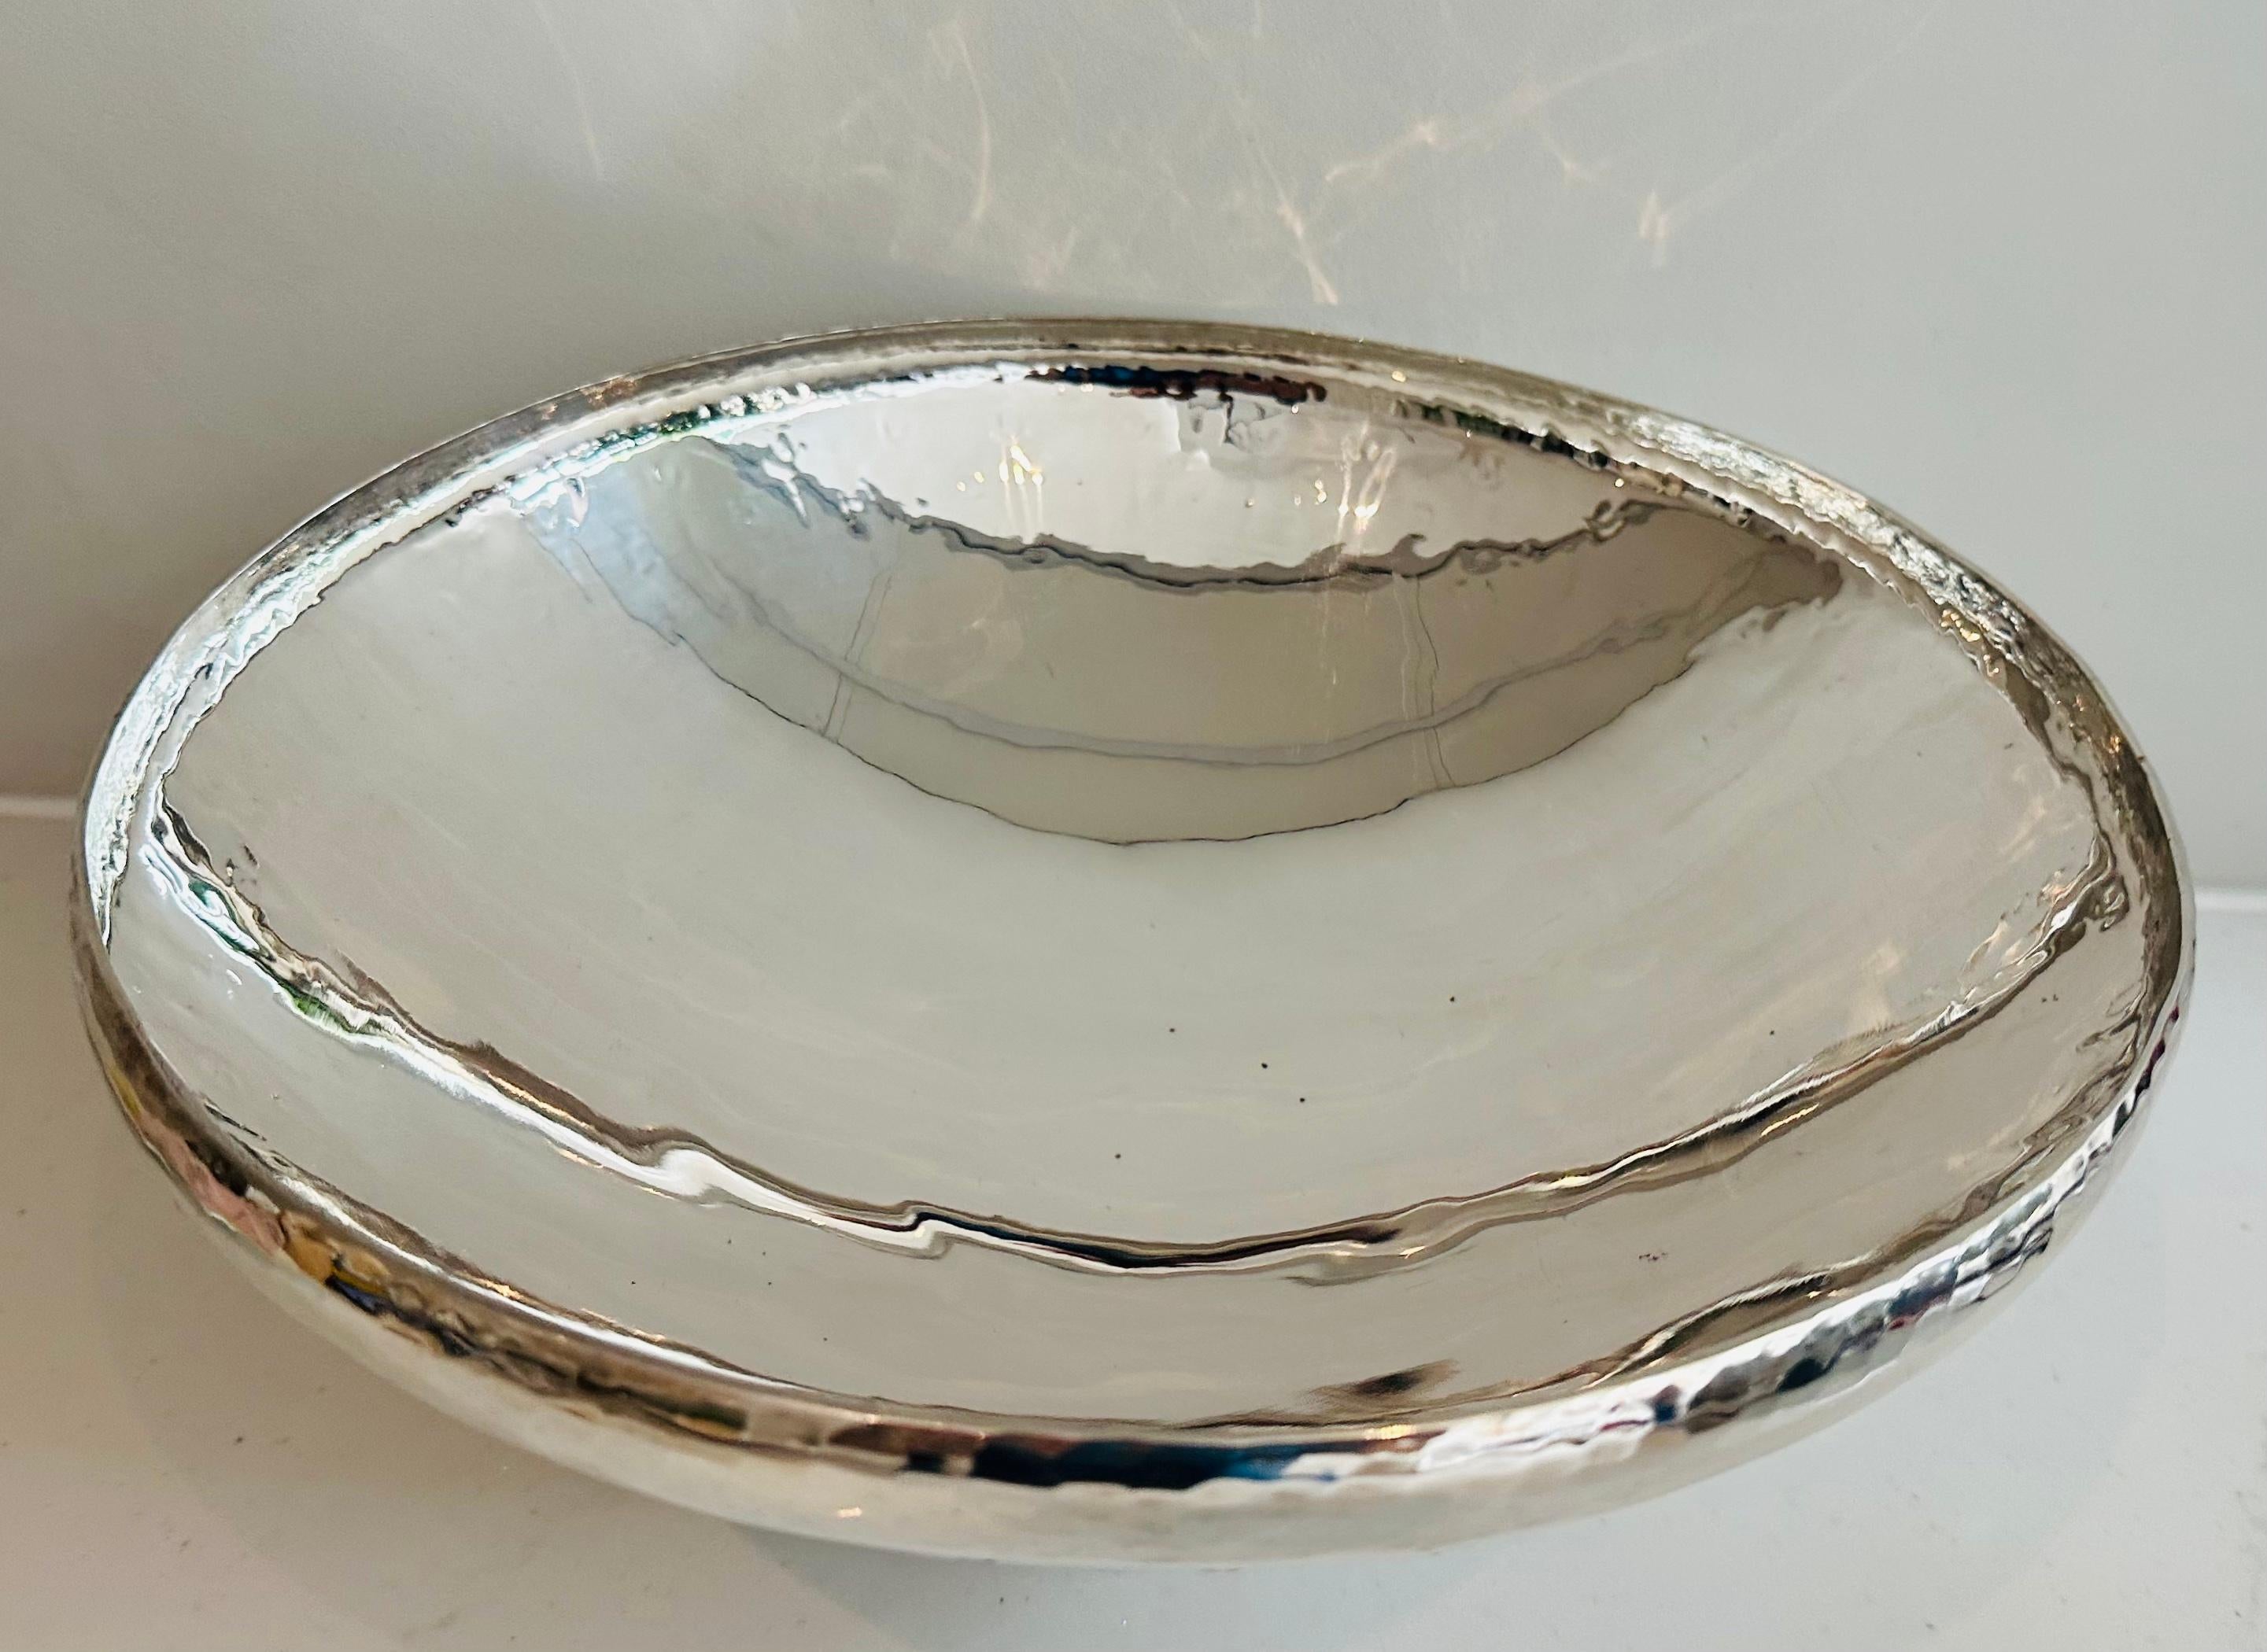 1980s English Silver Plated Decorative Hand-Hammered Serving or Display Bowl For Sale 6